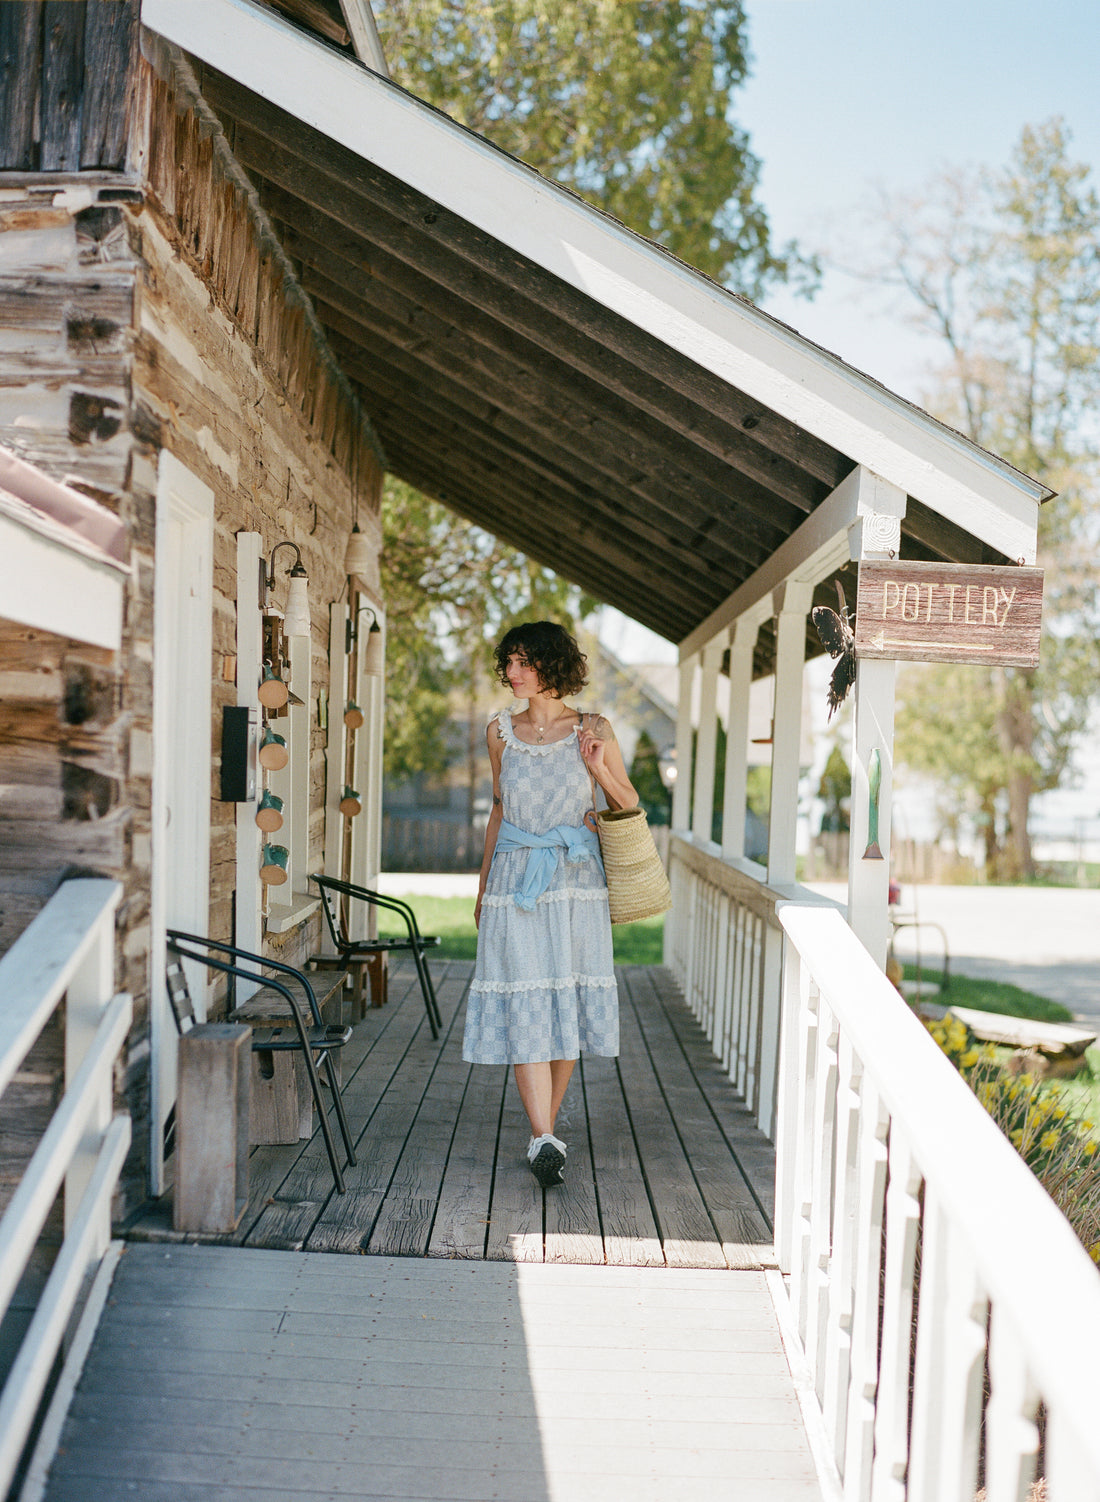 Vintage Shopping in Door County Wi Photo by: Aliza Baran